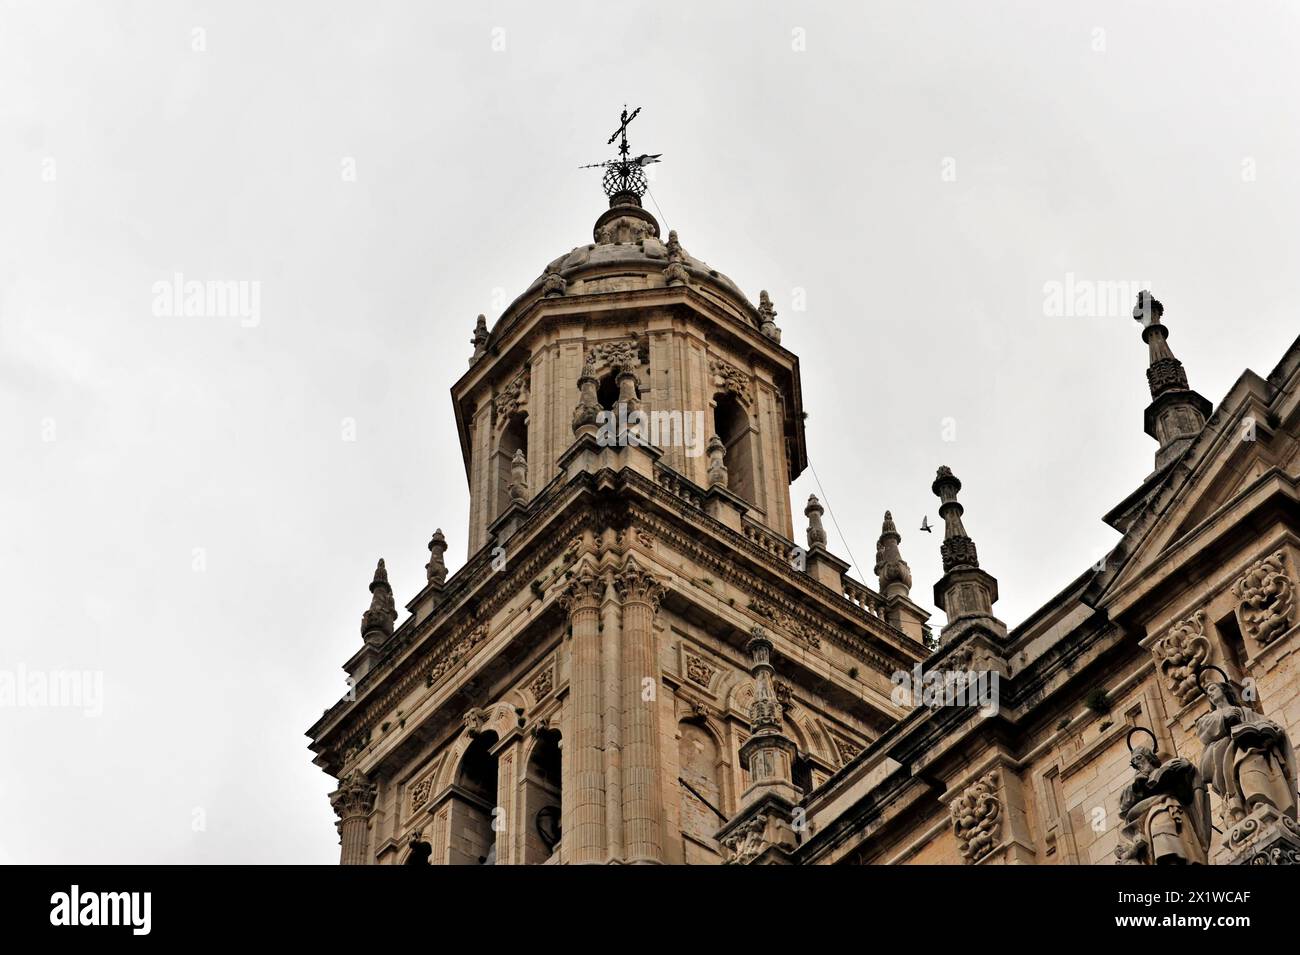 Jaen, Catedral de Jaen, Cathedral of Jaen from the 13th century, art epoch Renaissance, Jaen, detail of the baroque bell tower of a church in Stock Photo